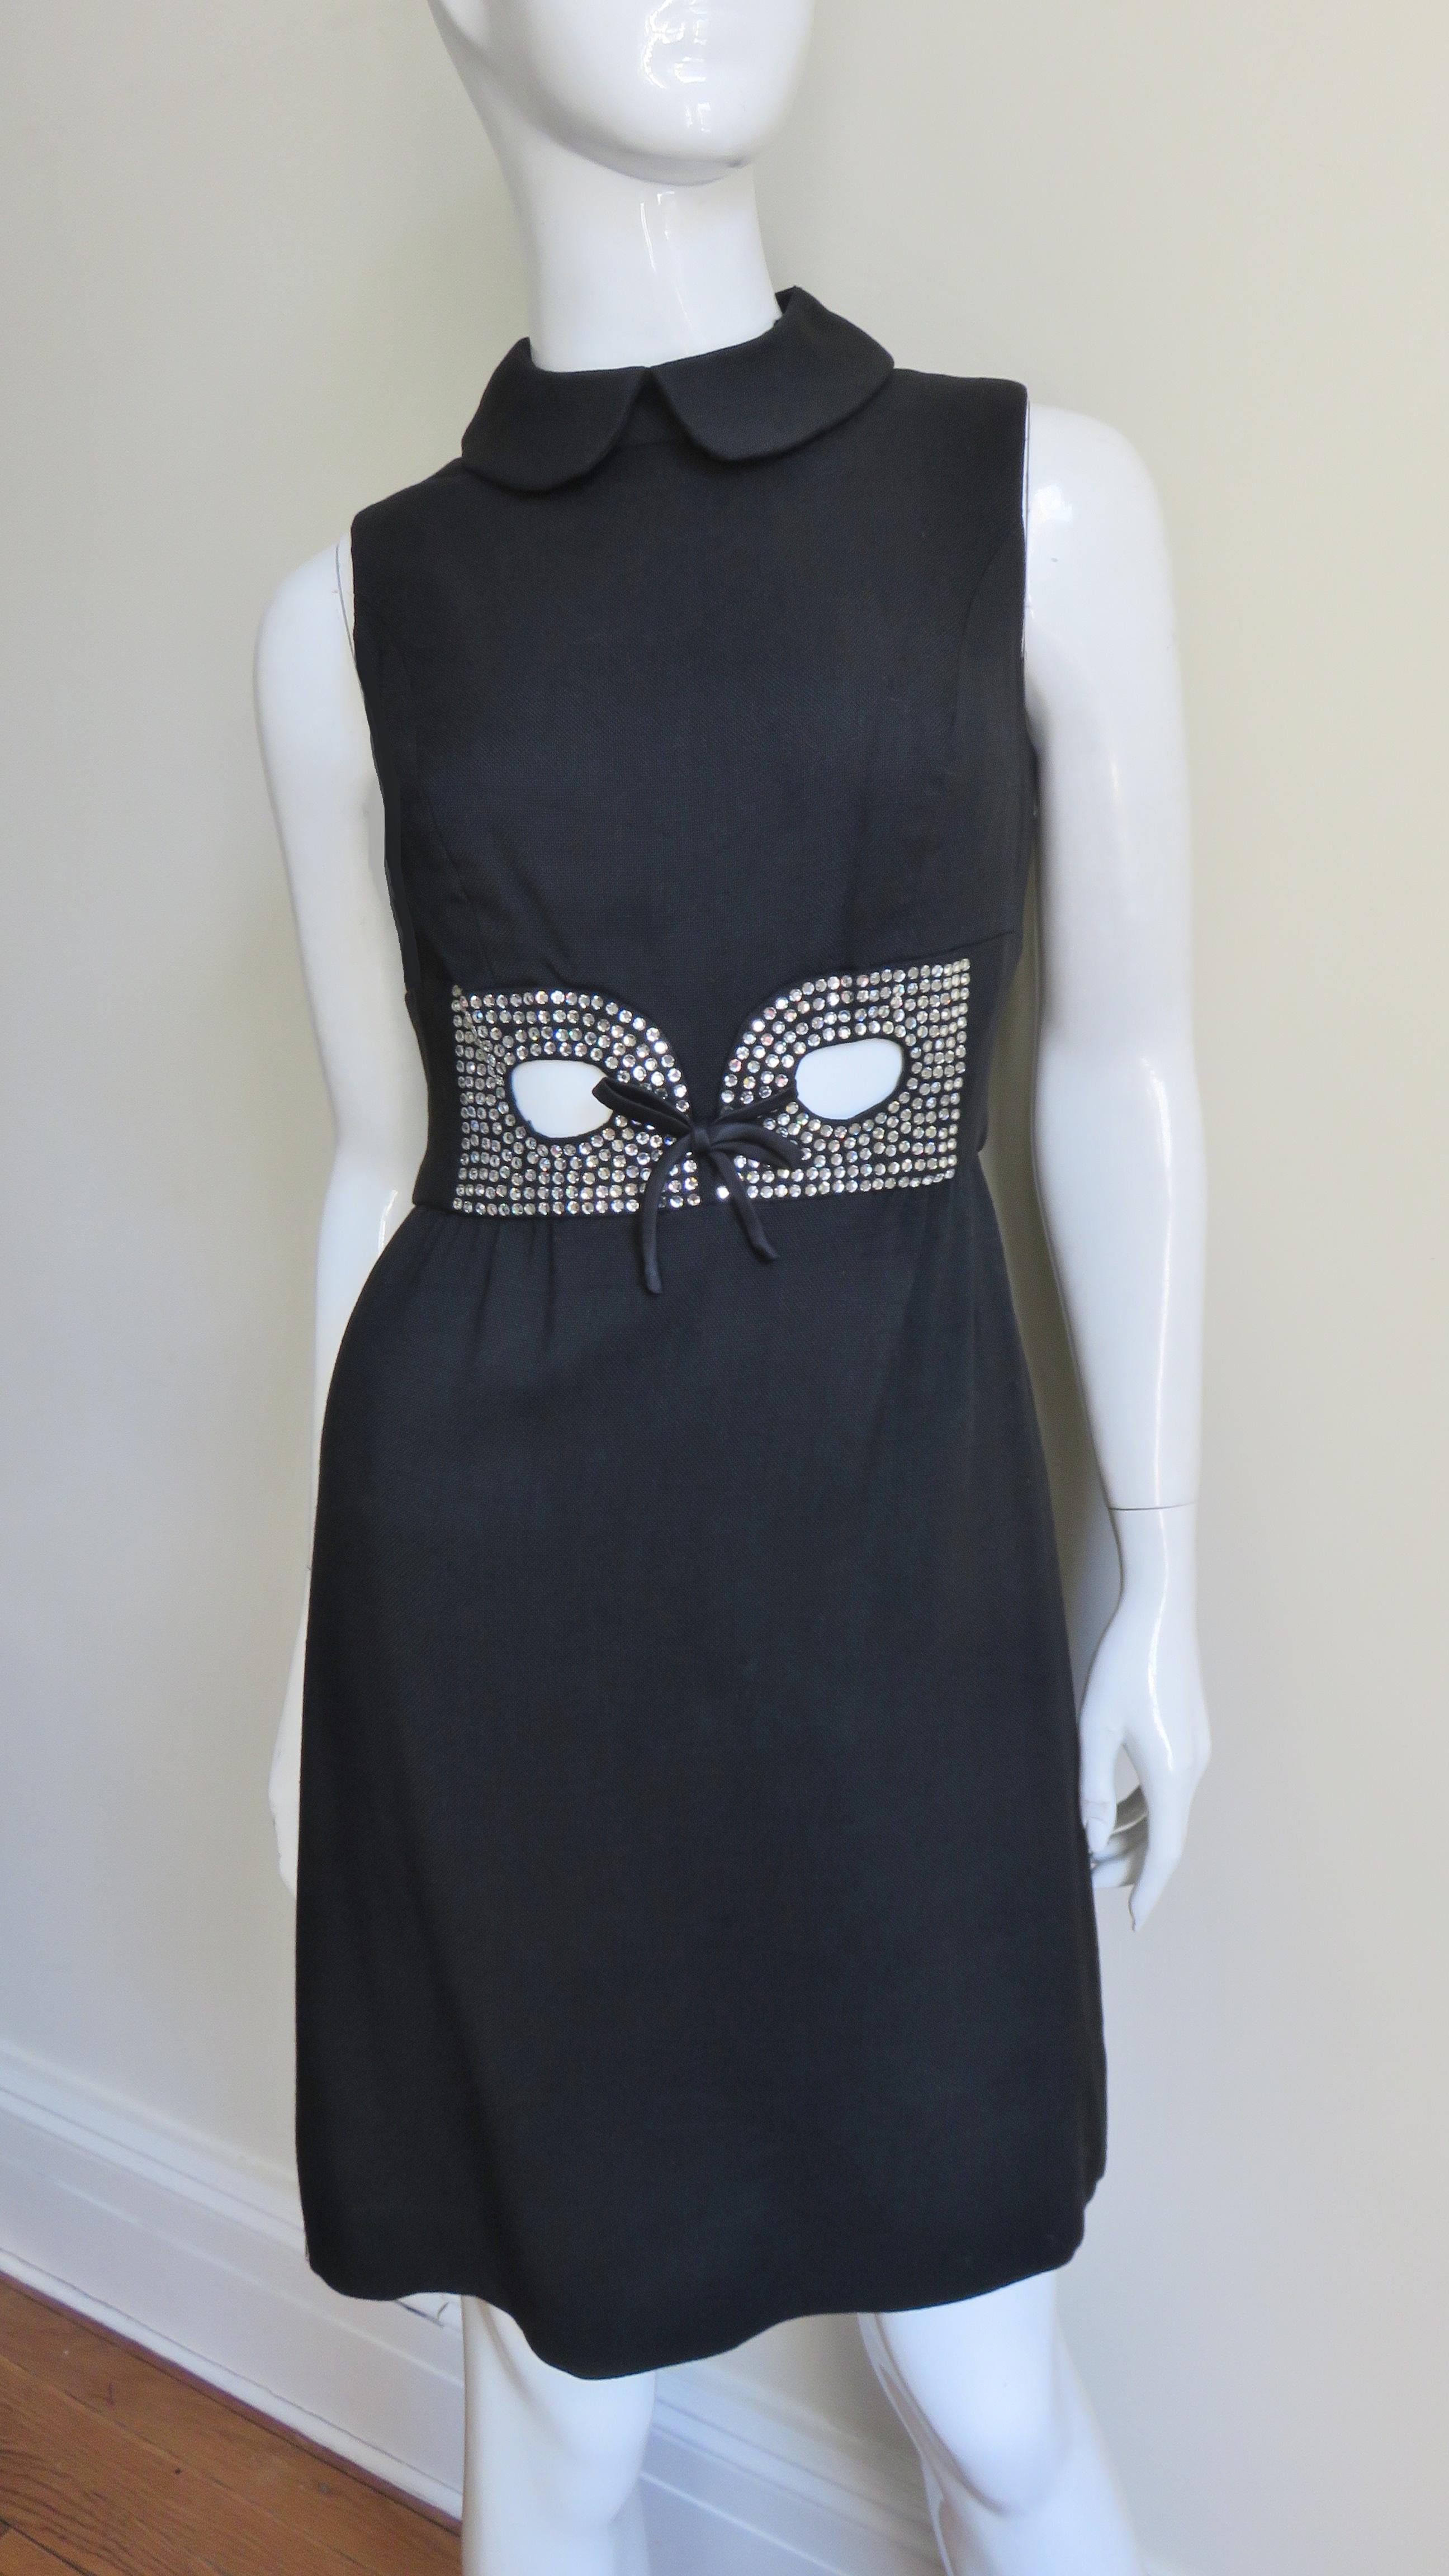 A great black 1960s linen dress from I.Magnin.  It is sleeveless with a peter pan collar and princess seaming for a terrific fit.  There is a panel around the waist with small prong set rhinestone embellished cut outs at the center front and the